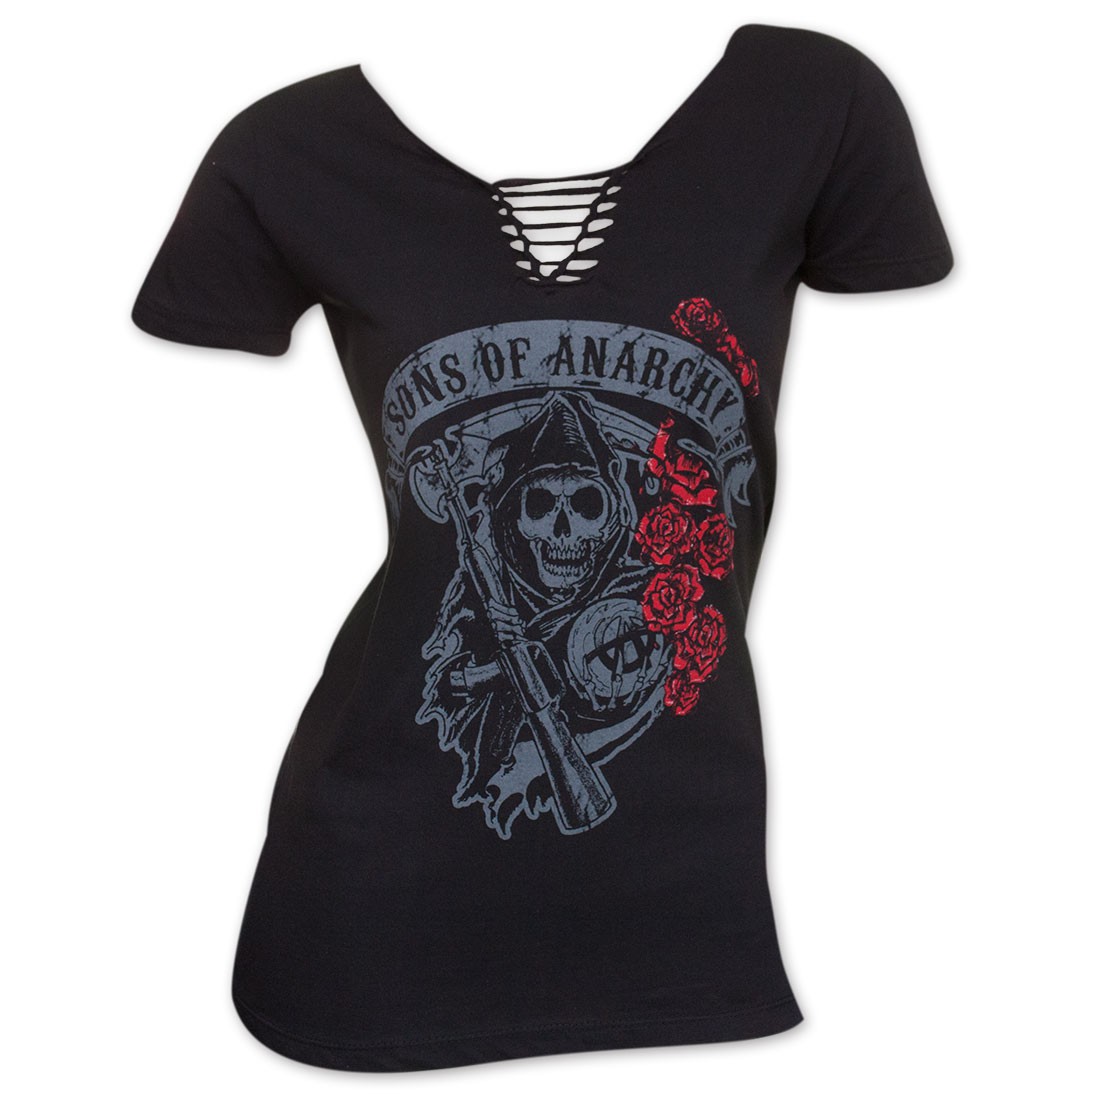 Sons Of Anarchy Women's Lace-Up Roses Tee Shirt